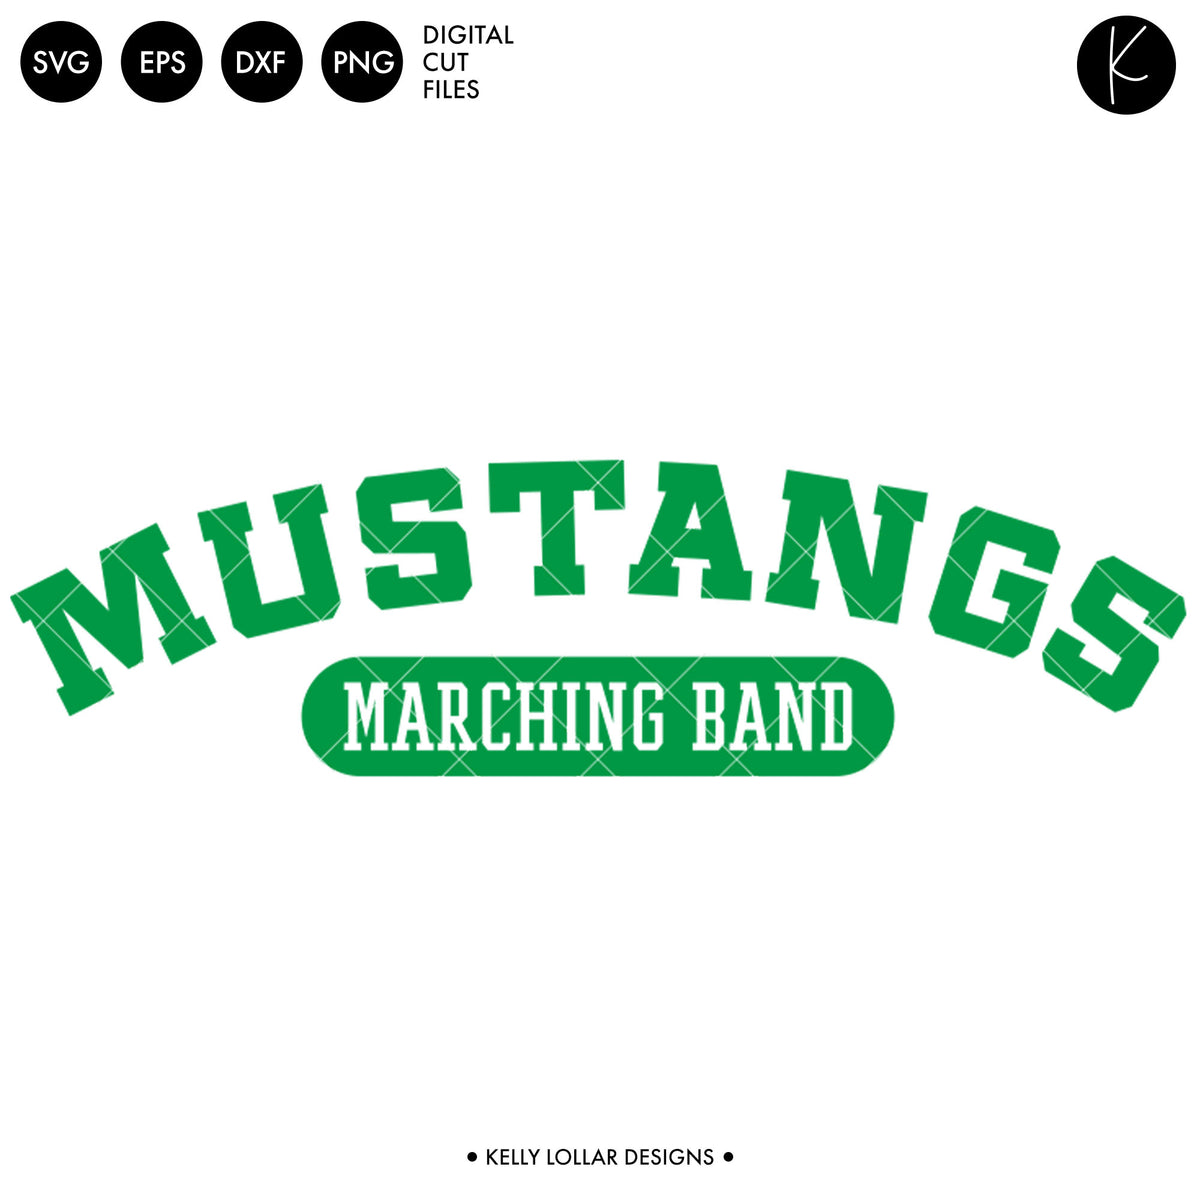 Mustangs Band Bundle | SVG DXF EPS PNG Cut Files